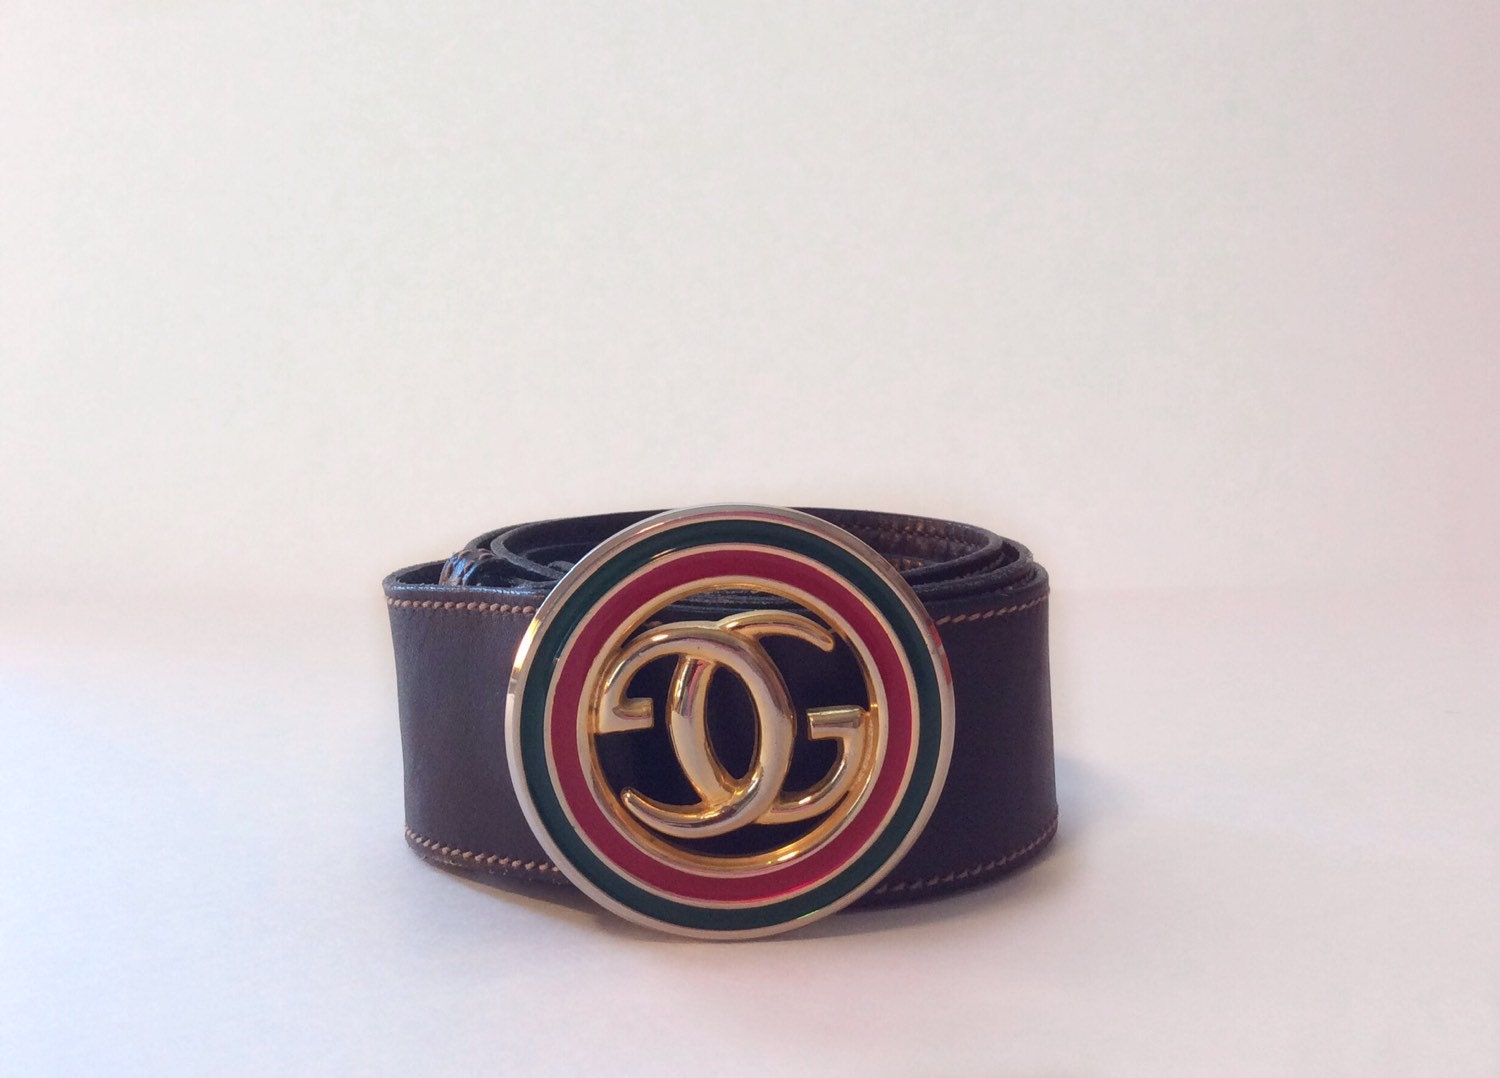 Vintage Gucci belt // brown leather GG logo // rare red green